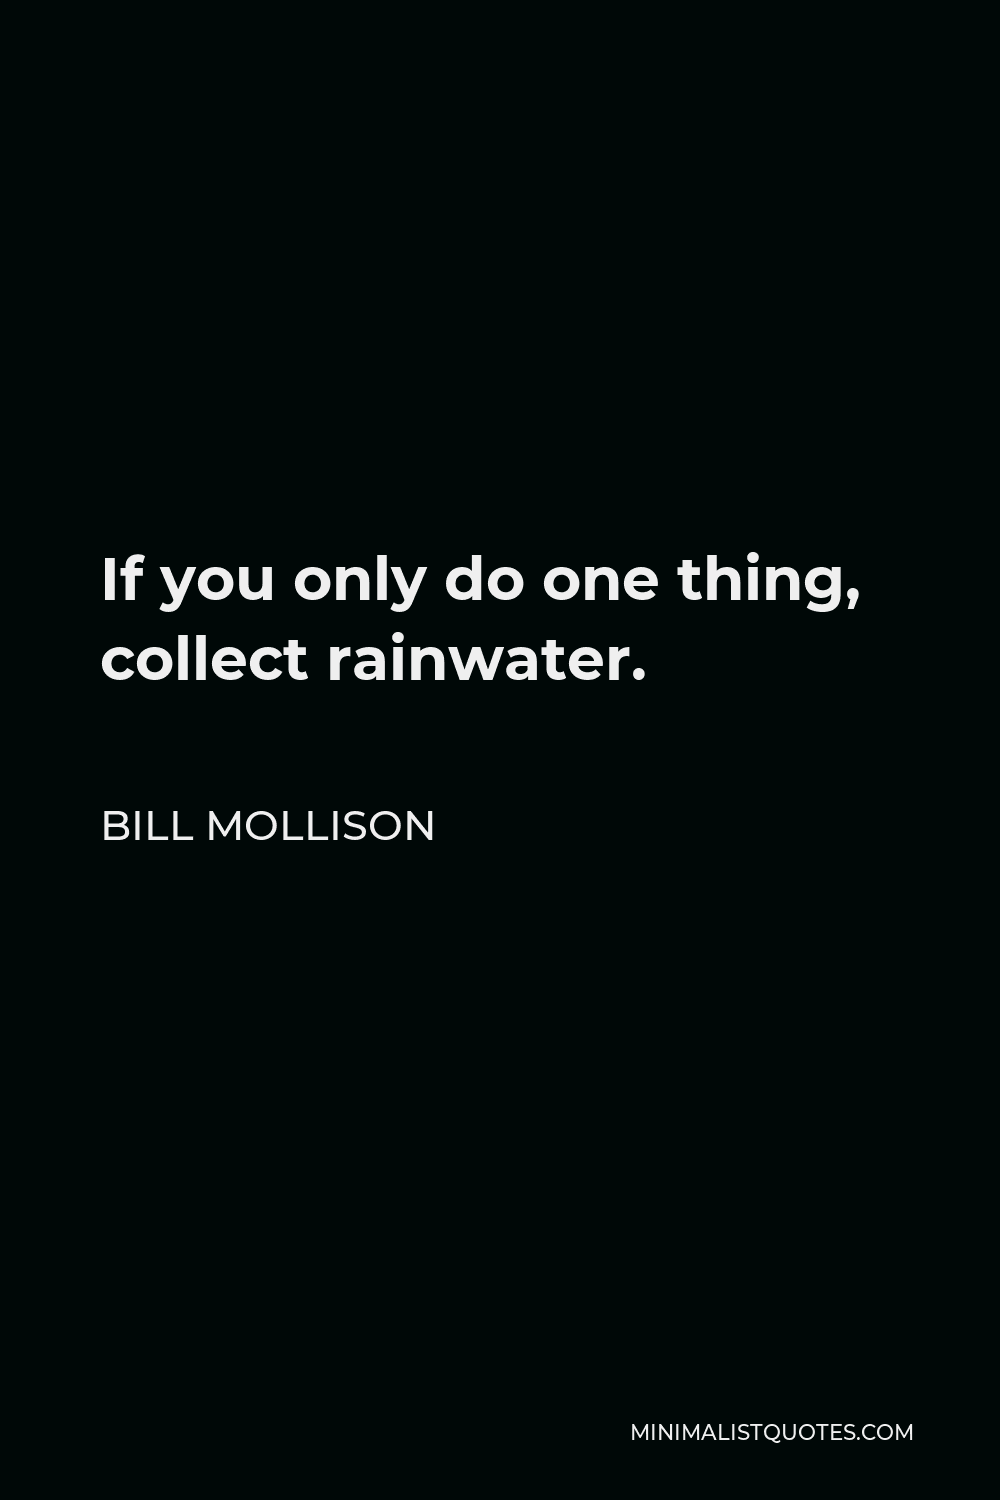 Bill Mollison Quote - If you only do one thing, collect rainwater.